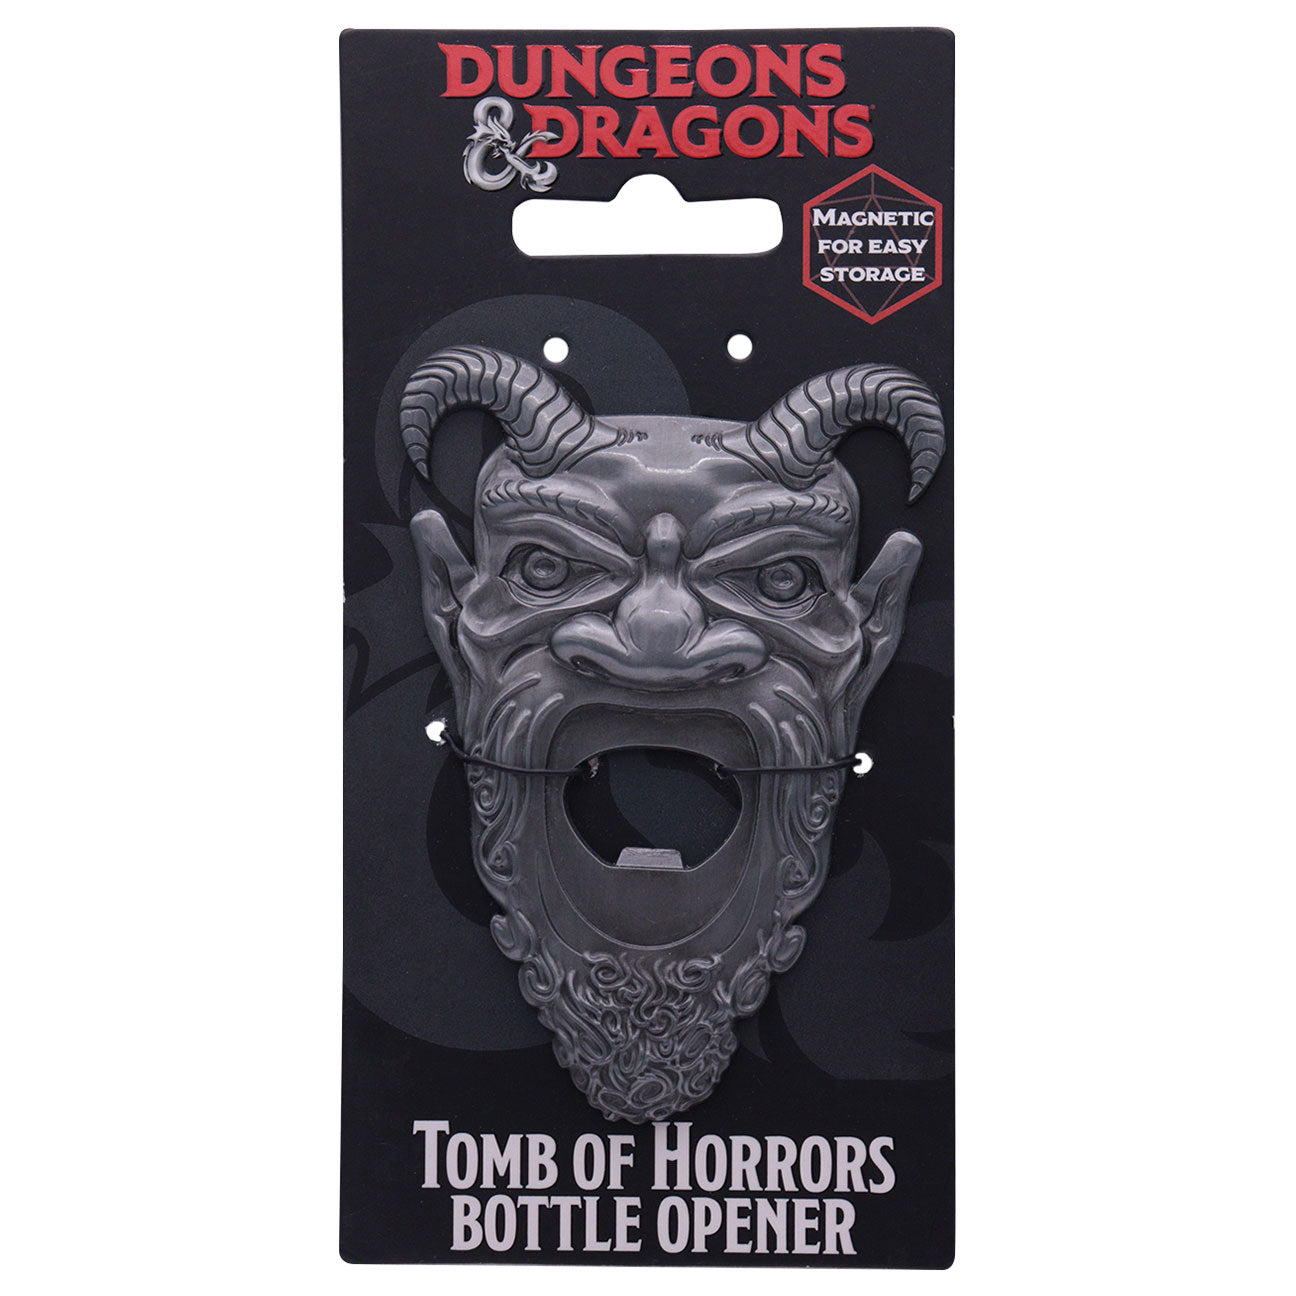 Dungeons & Dragons Tomb of Horrors Bottle Opener